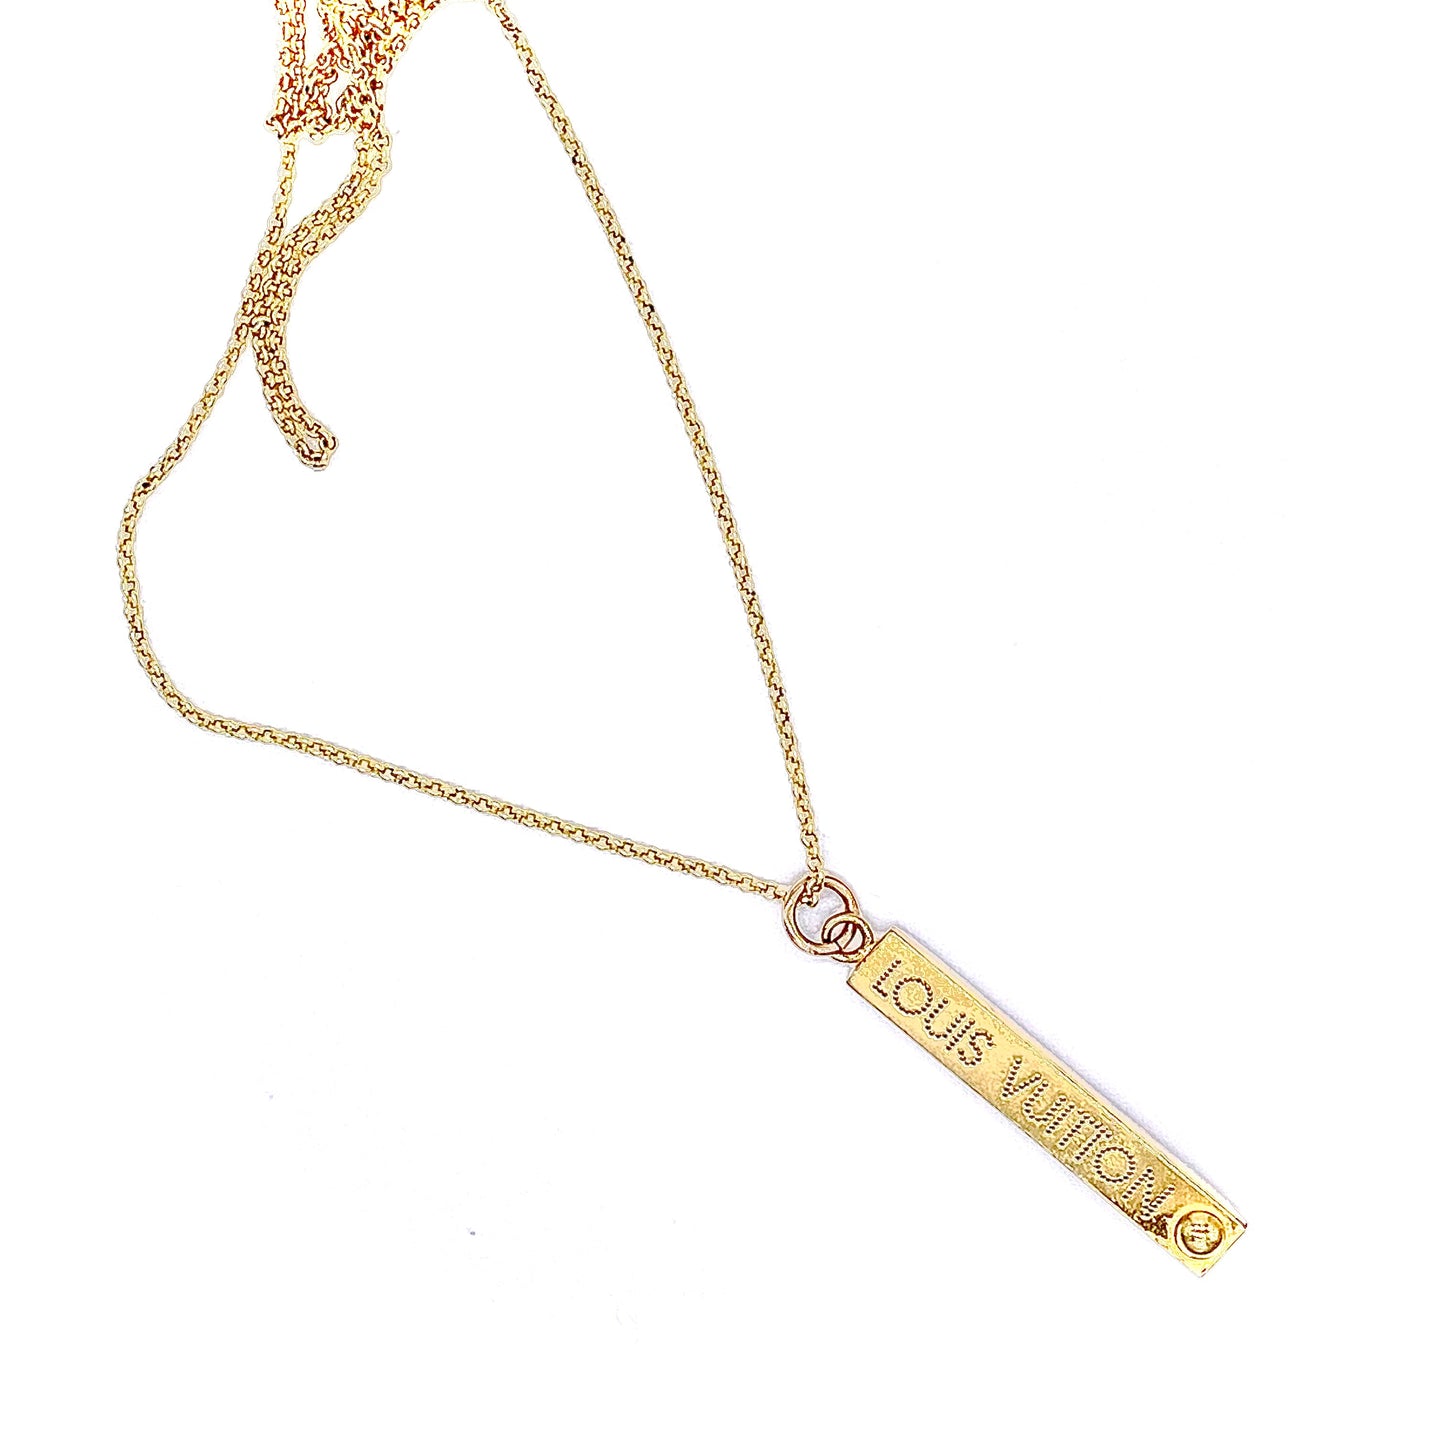 Chic Louis Vuitton Large Bar Charm on Necklace